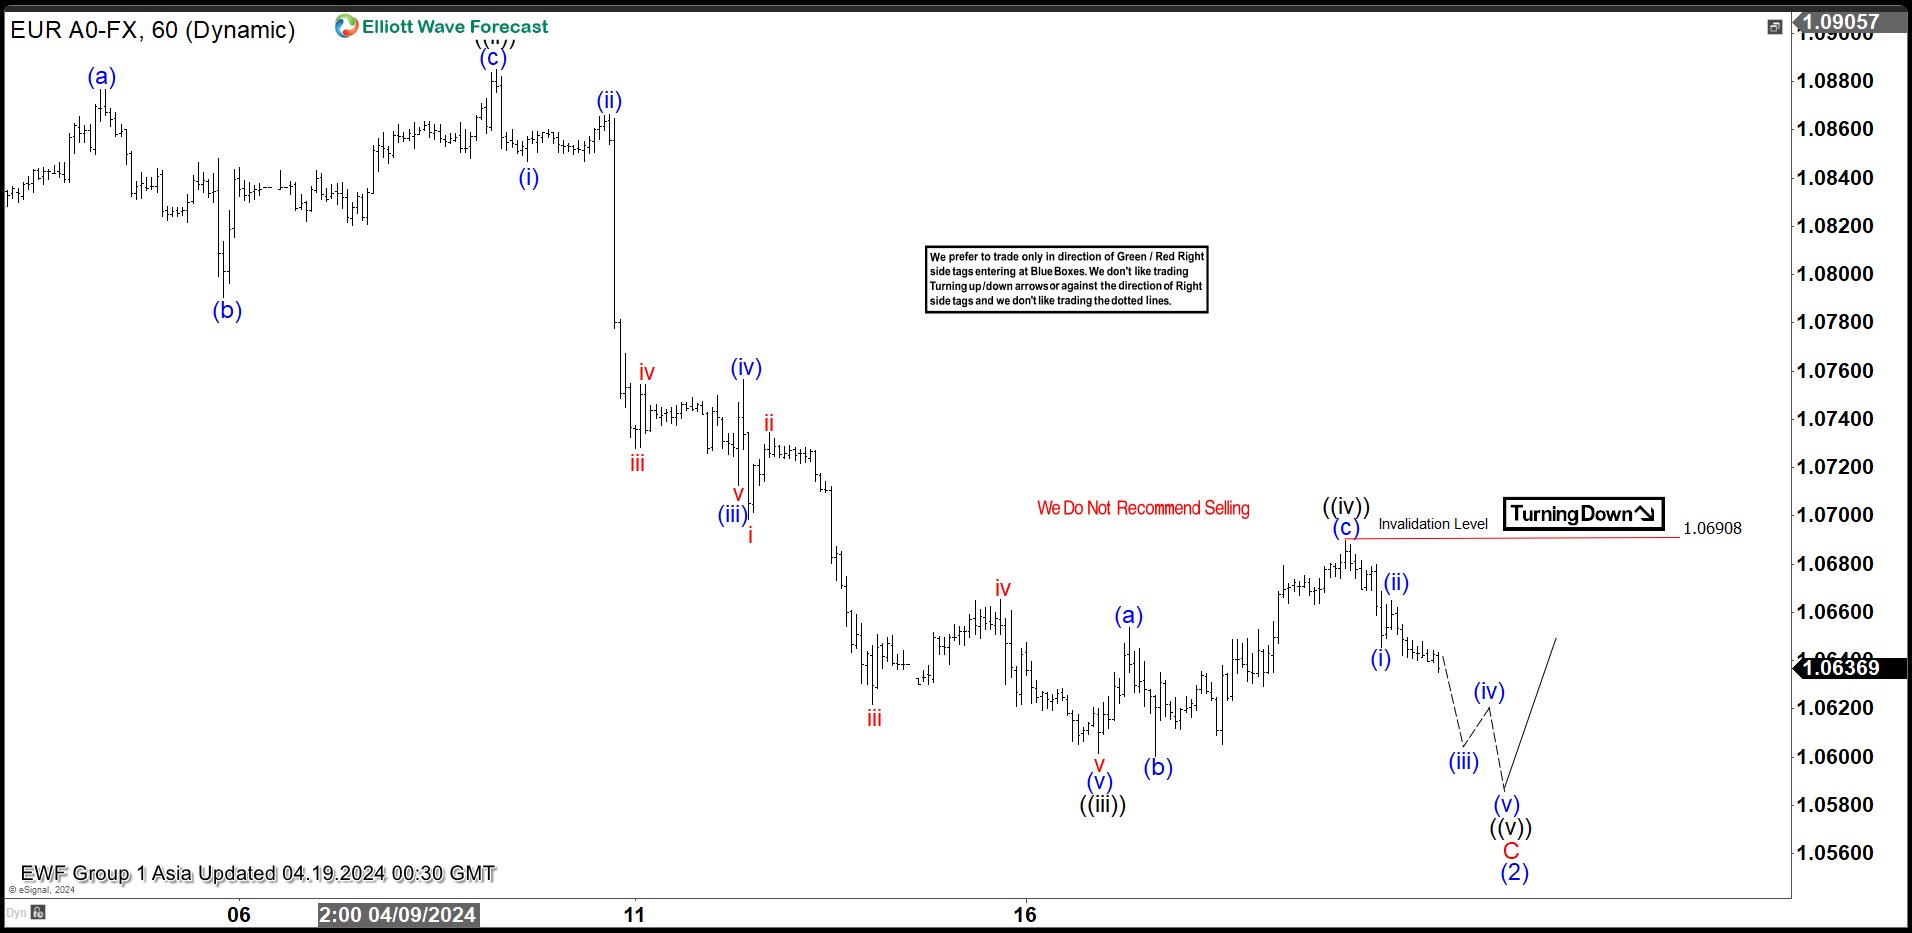 Forecast with Elliott Wave Technique Calling EURUSD to Extend Lower